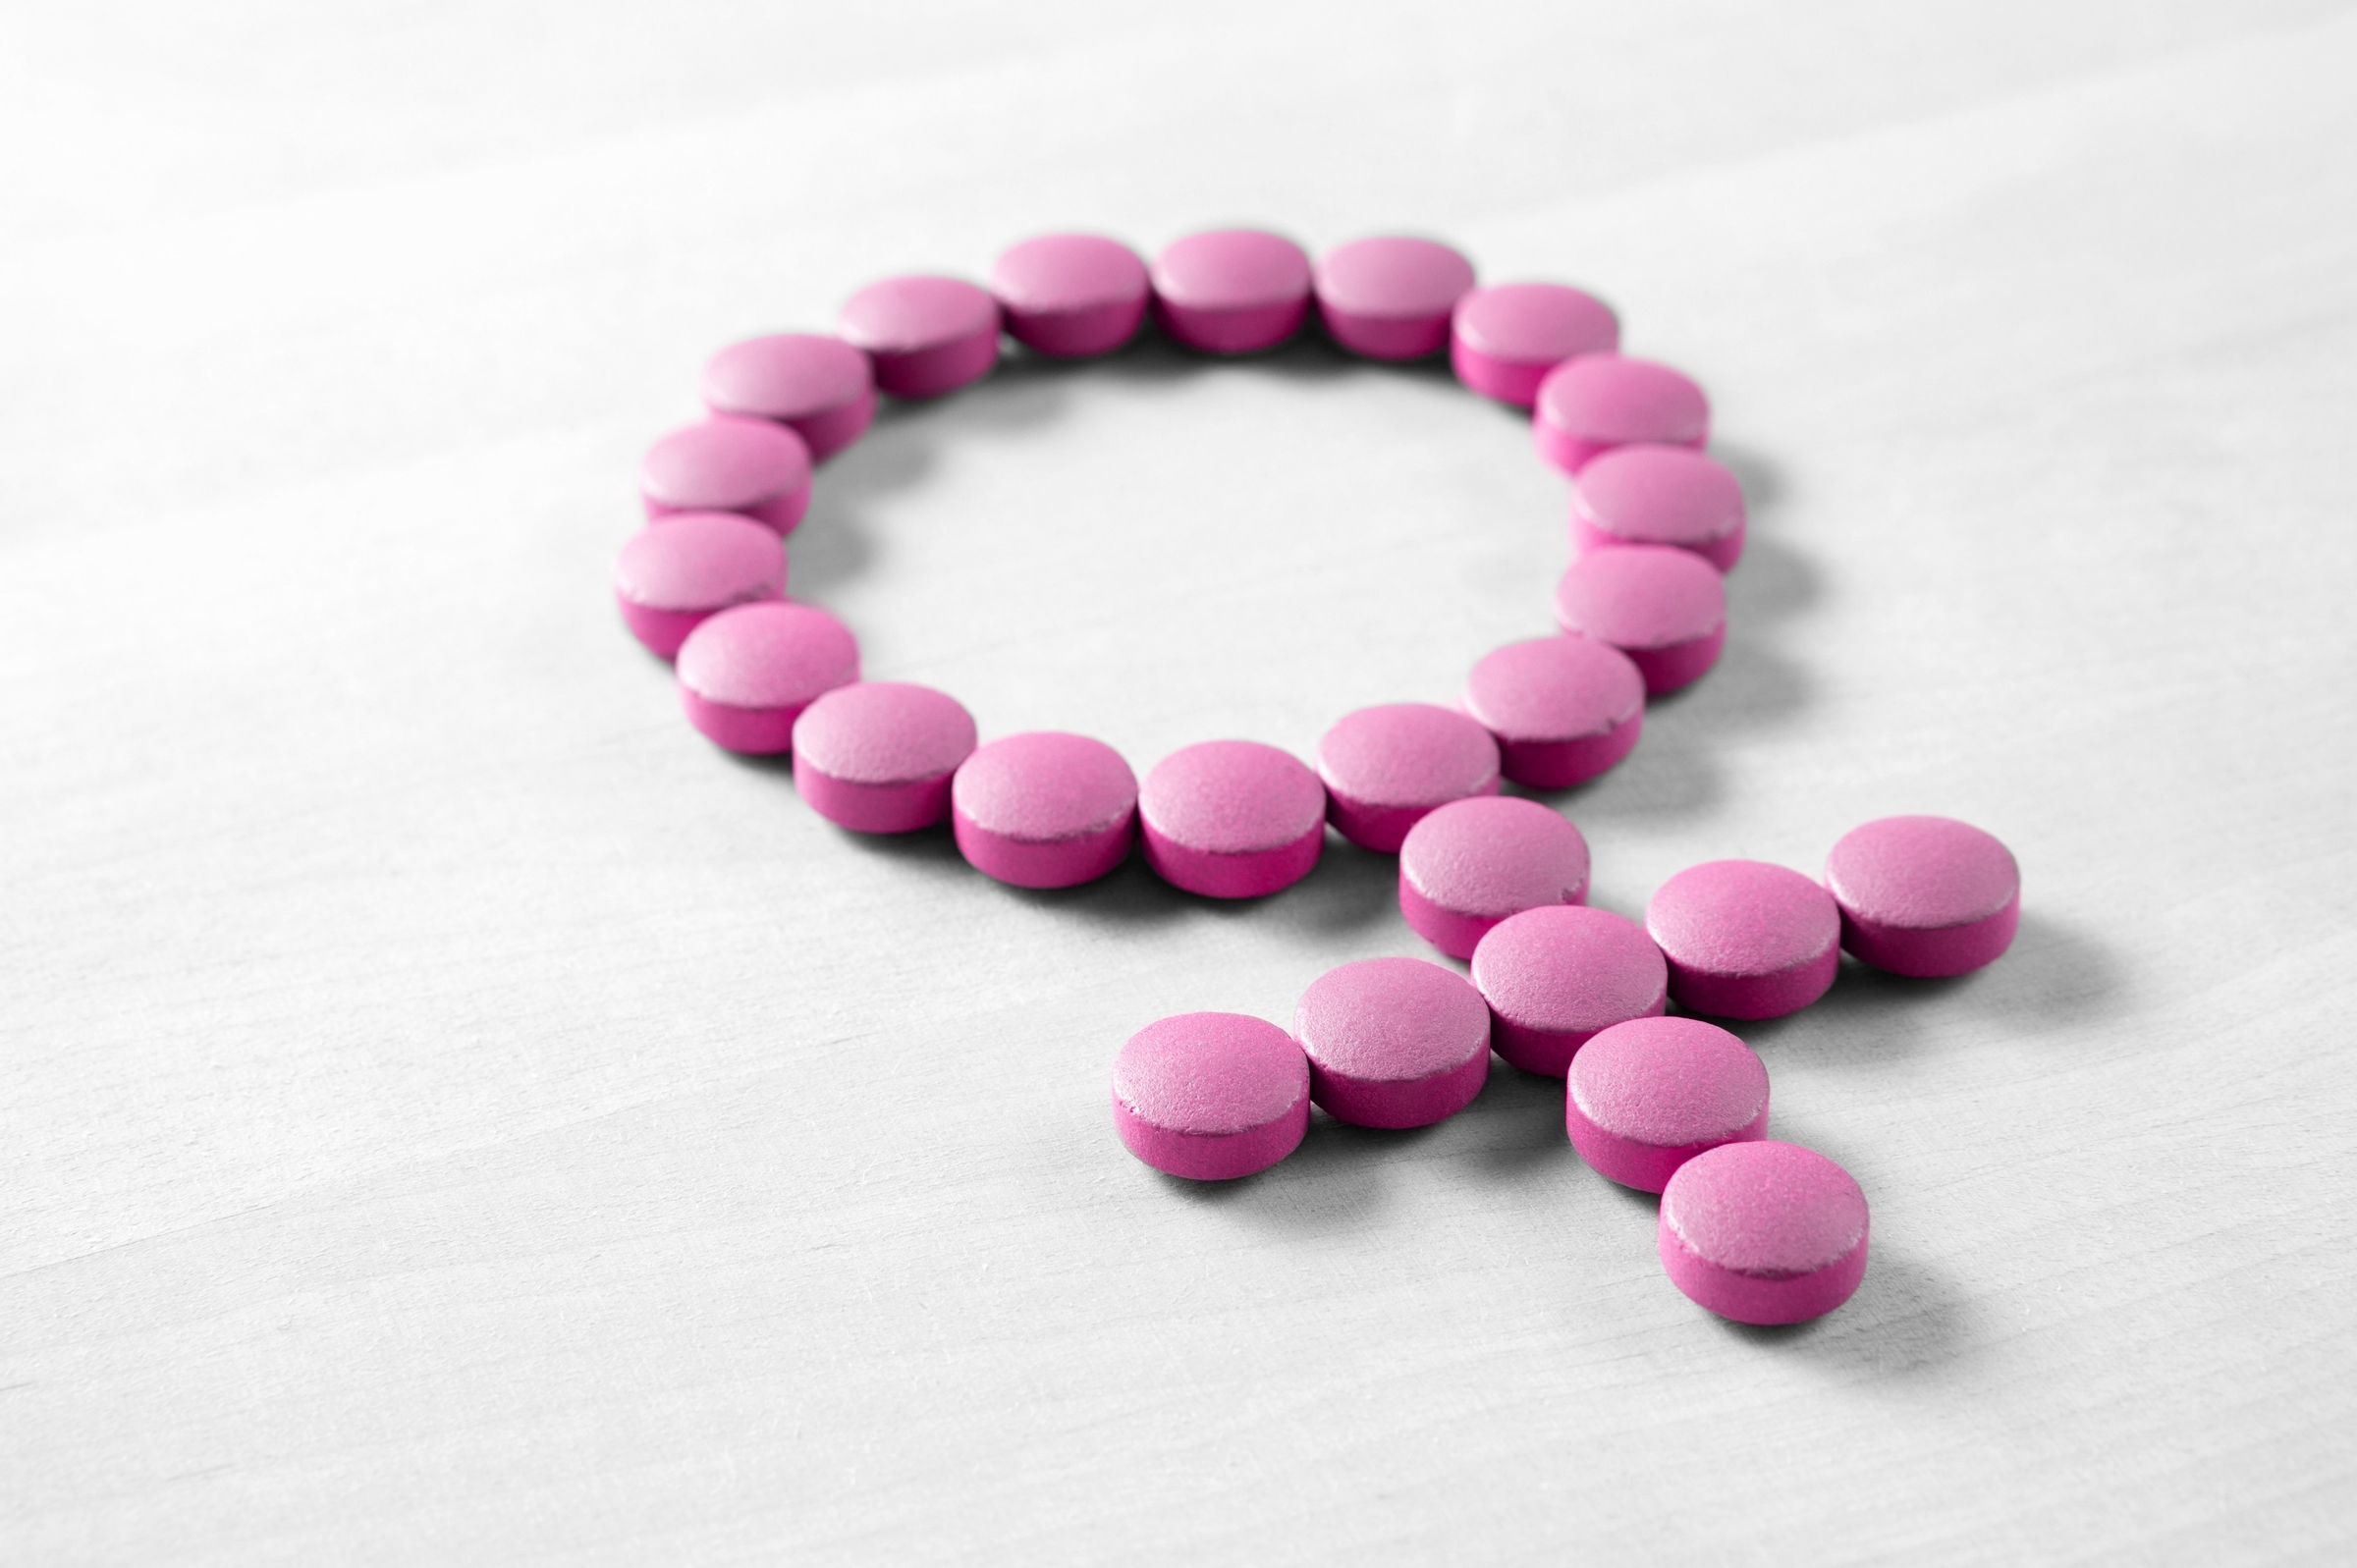 Does the Pill Cause Cancer?